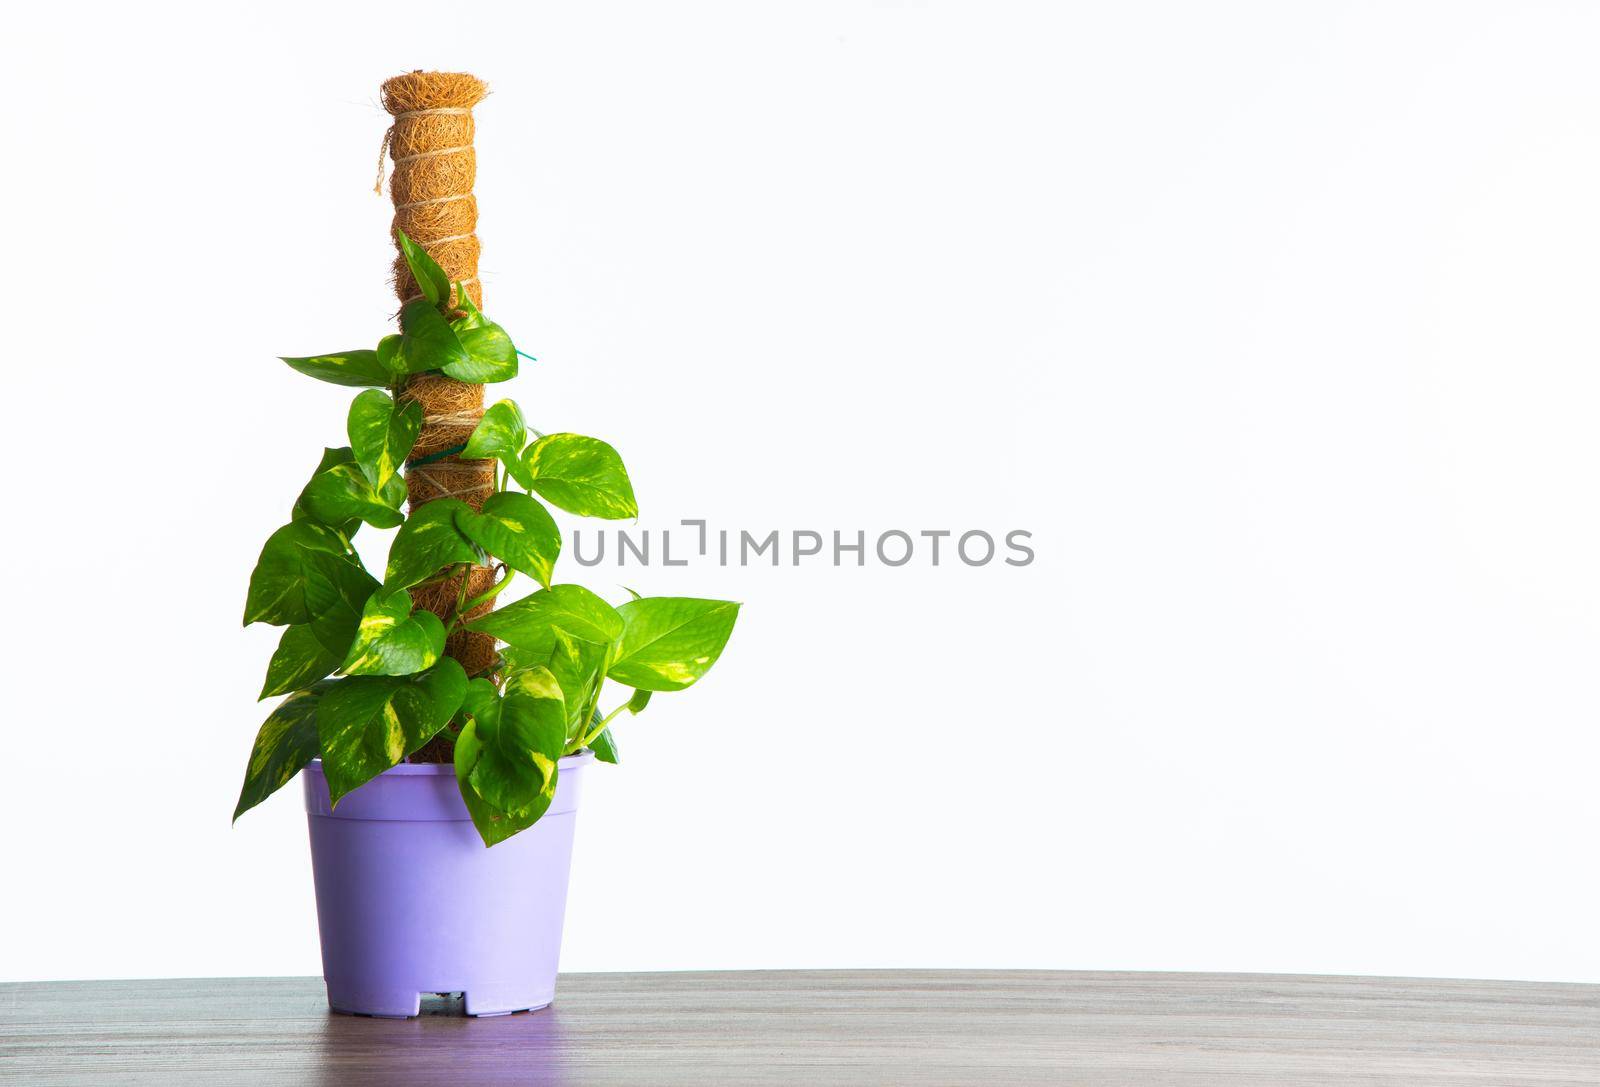 a pot of Golden Pothos plant by tehcheesiong